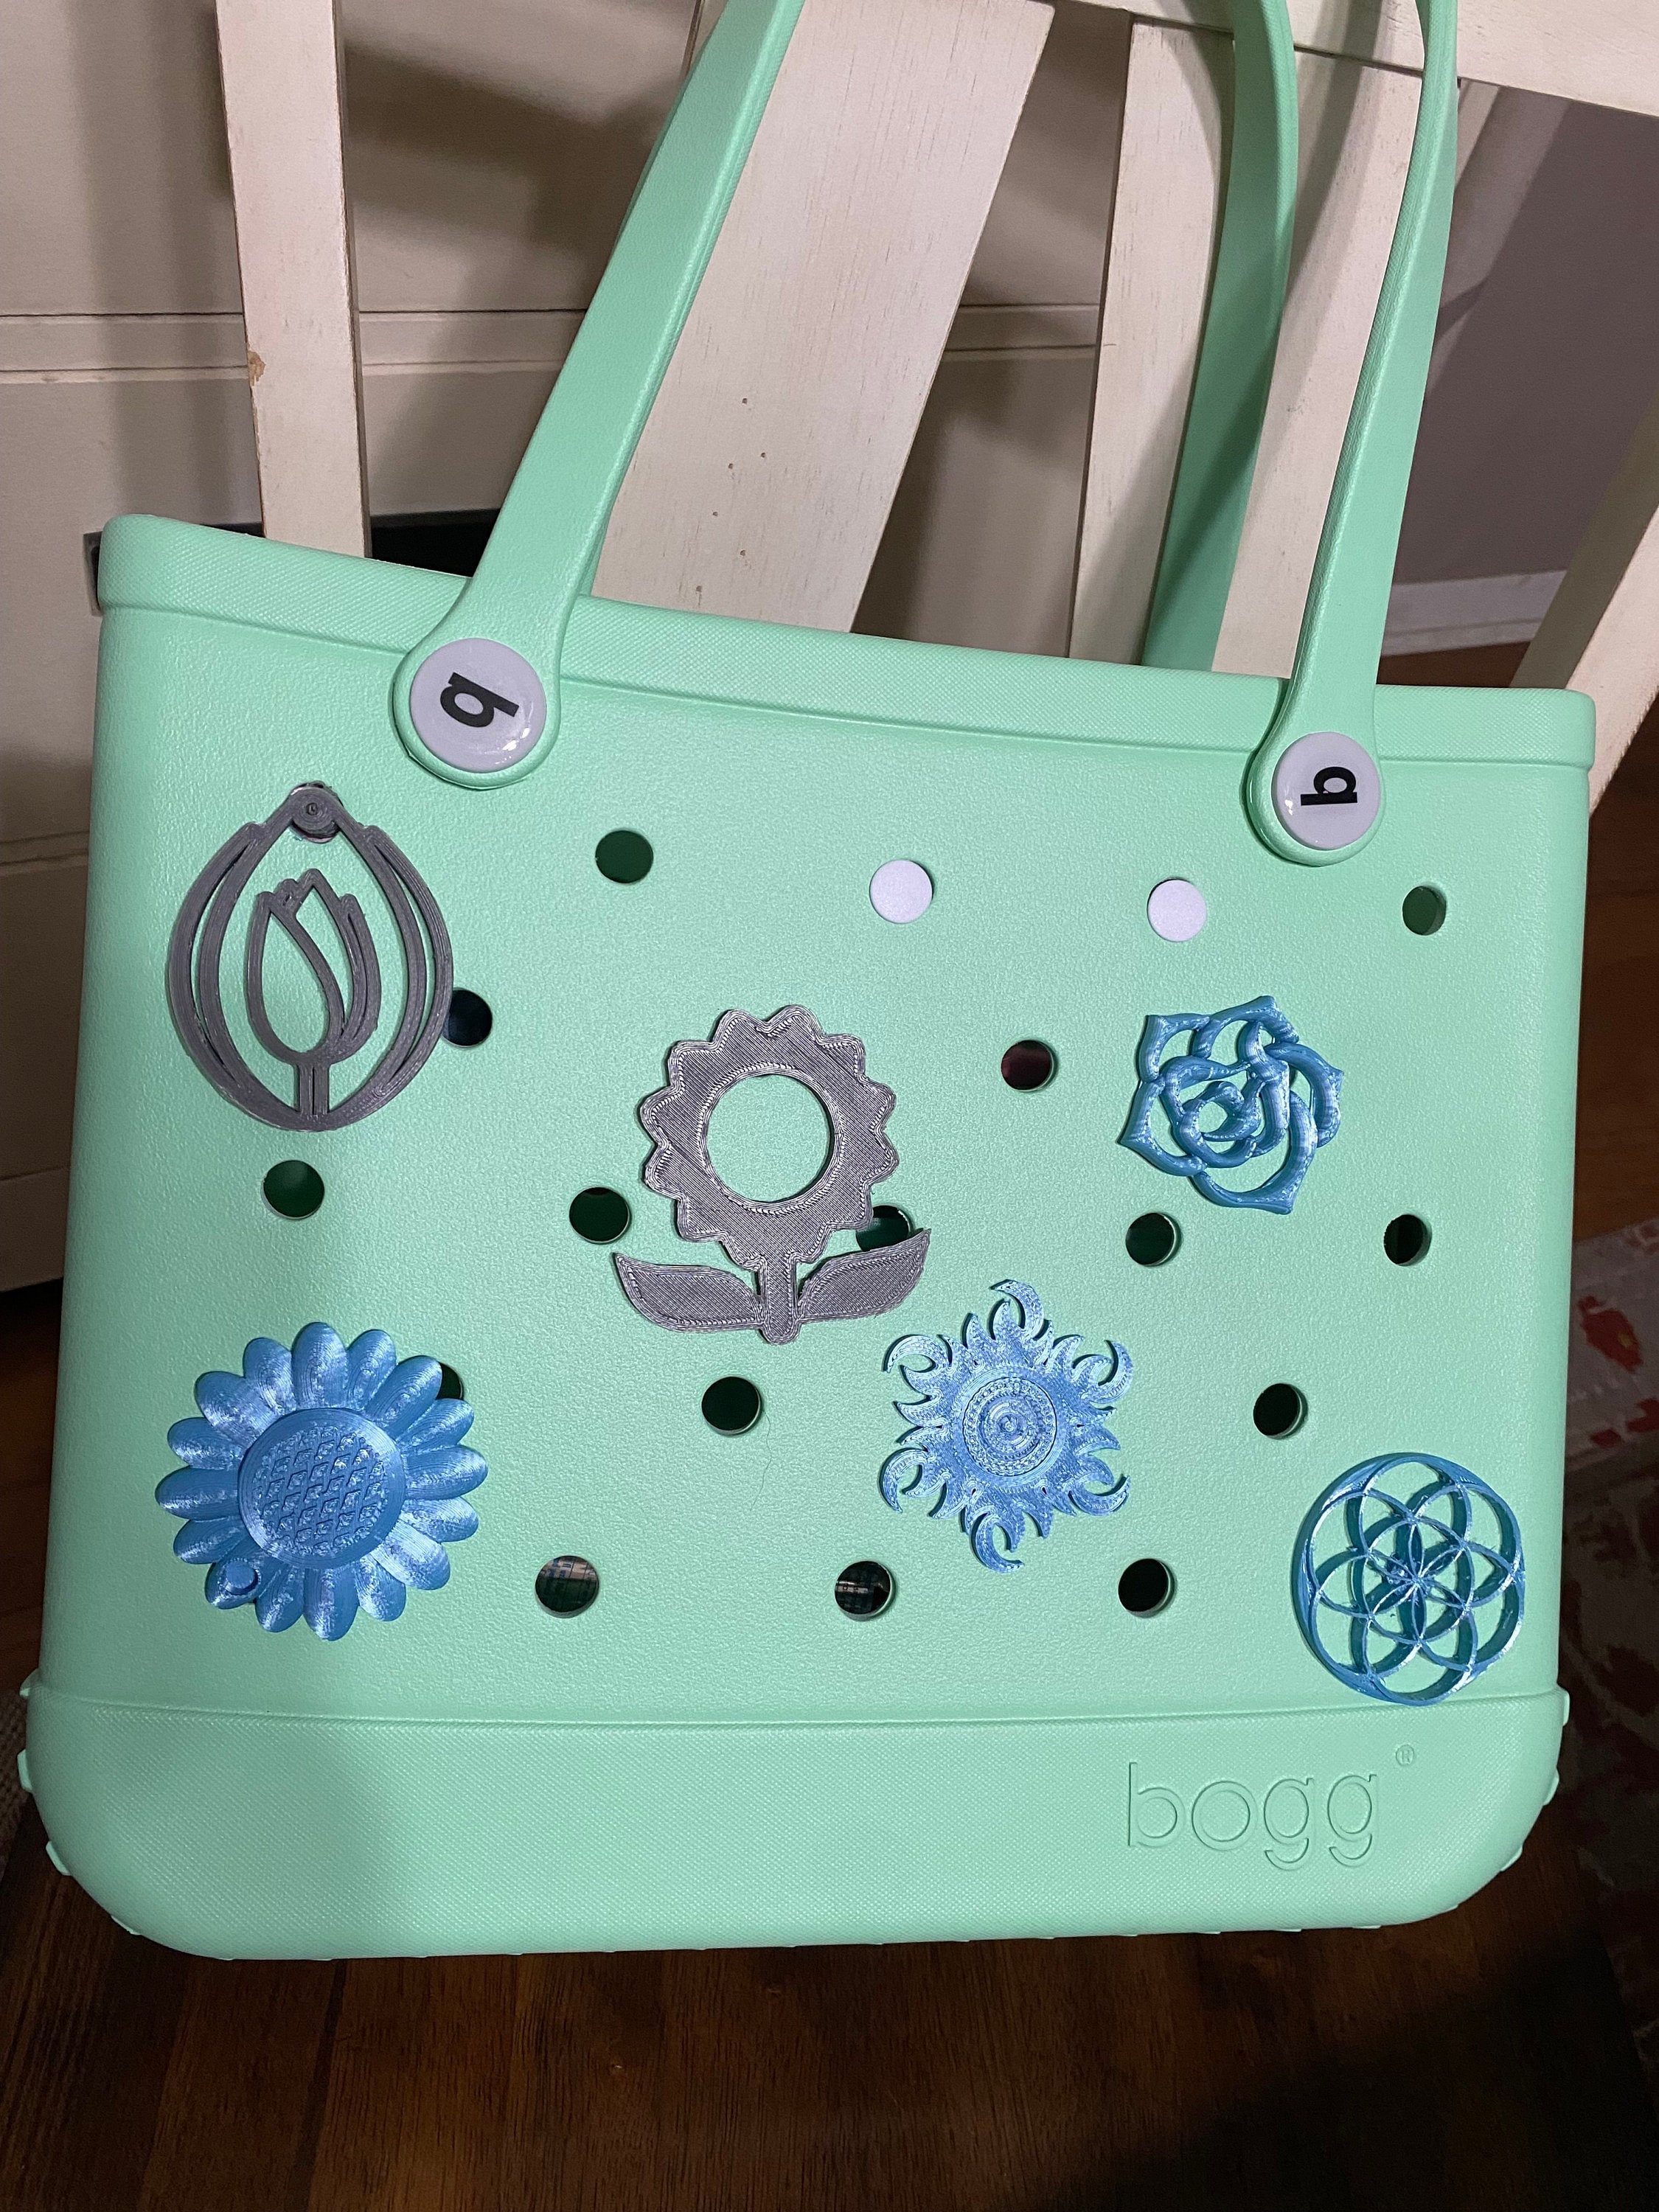 Bogg Bags *Special Edition* Baby Bogg Bag in ride of TIE DYE - Her